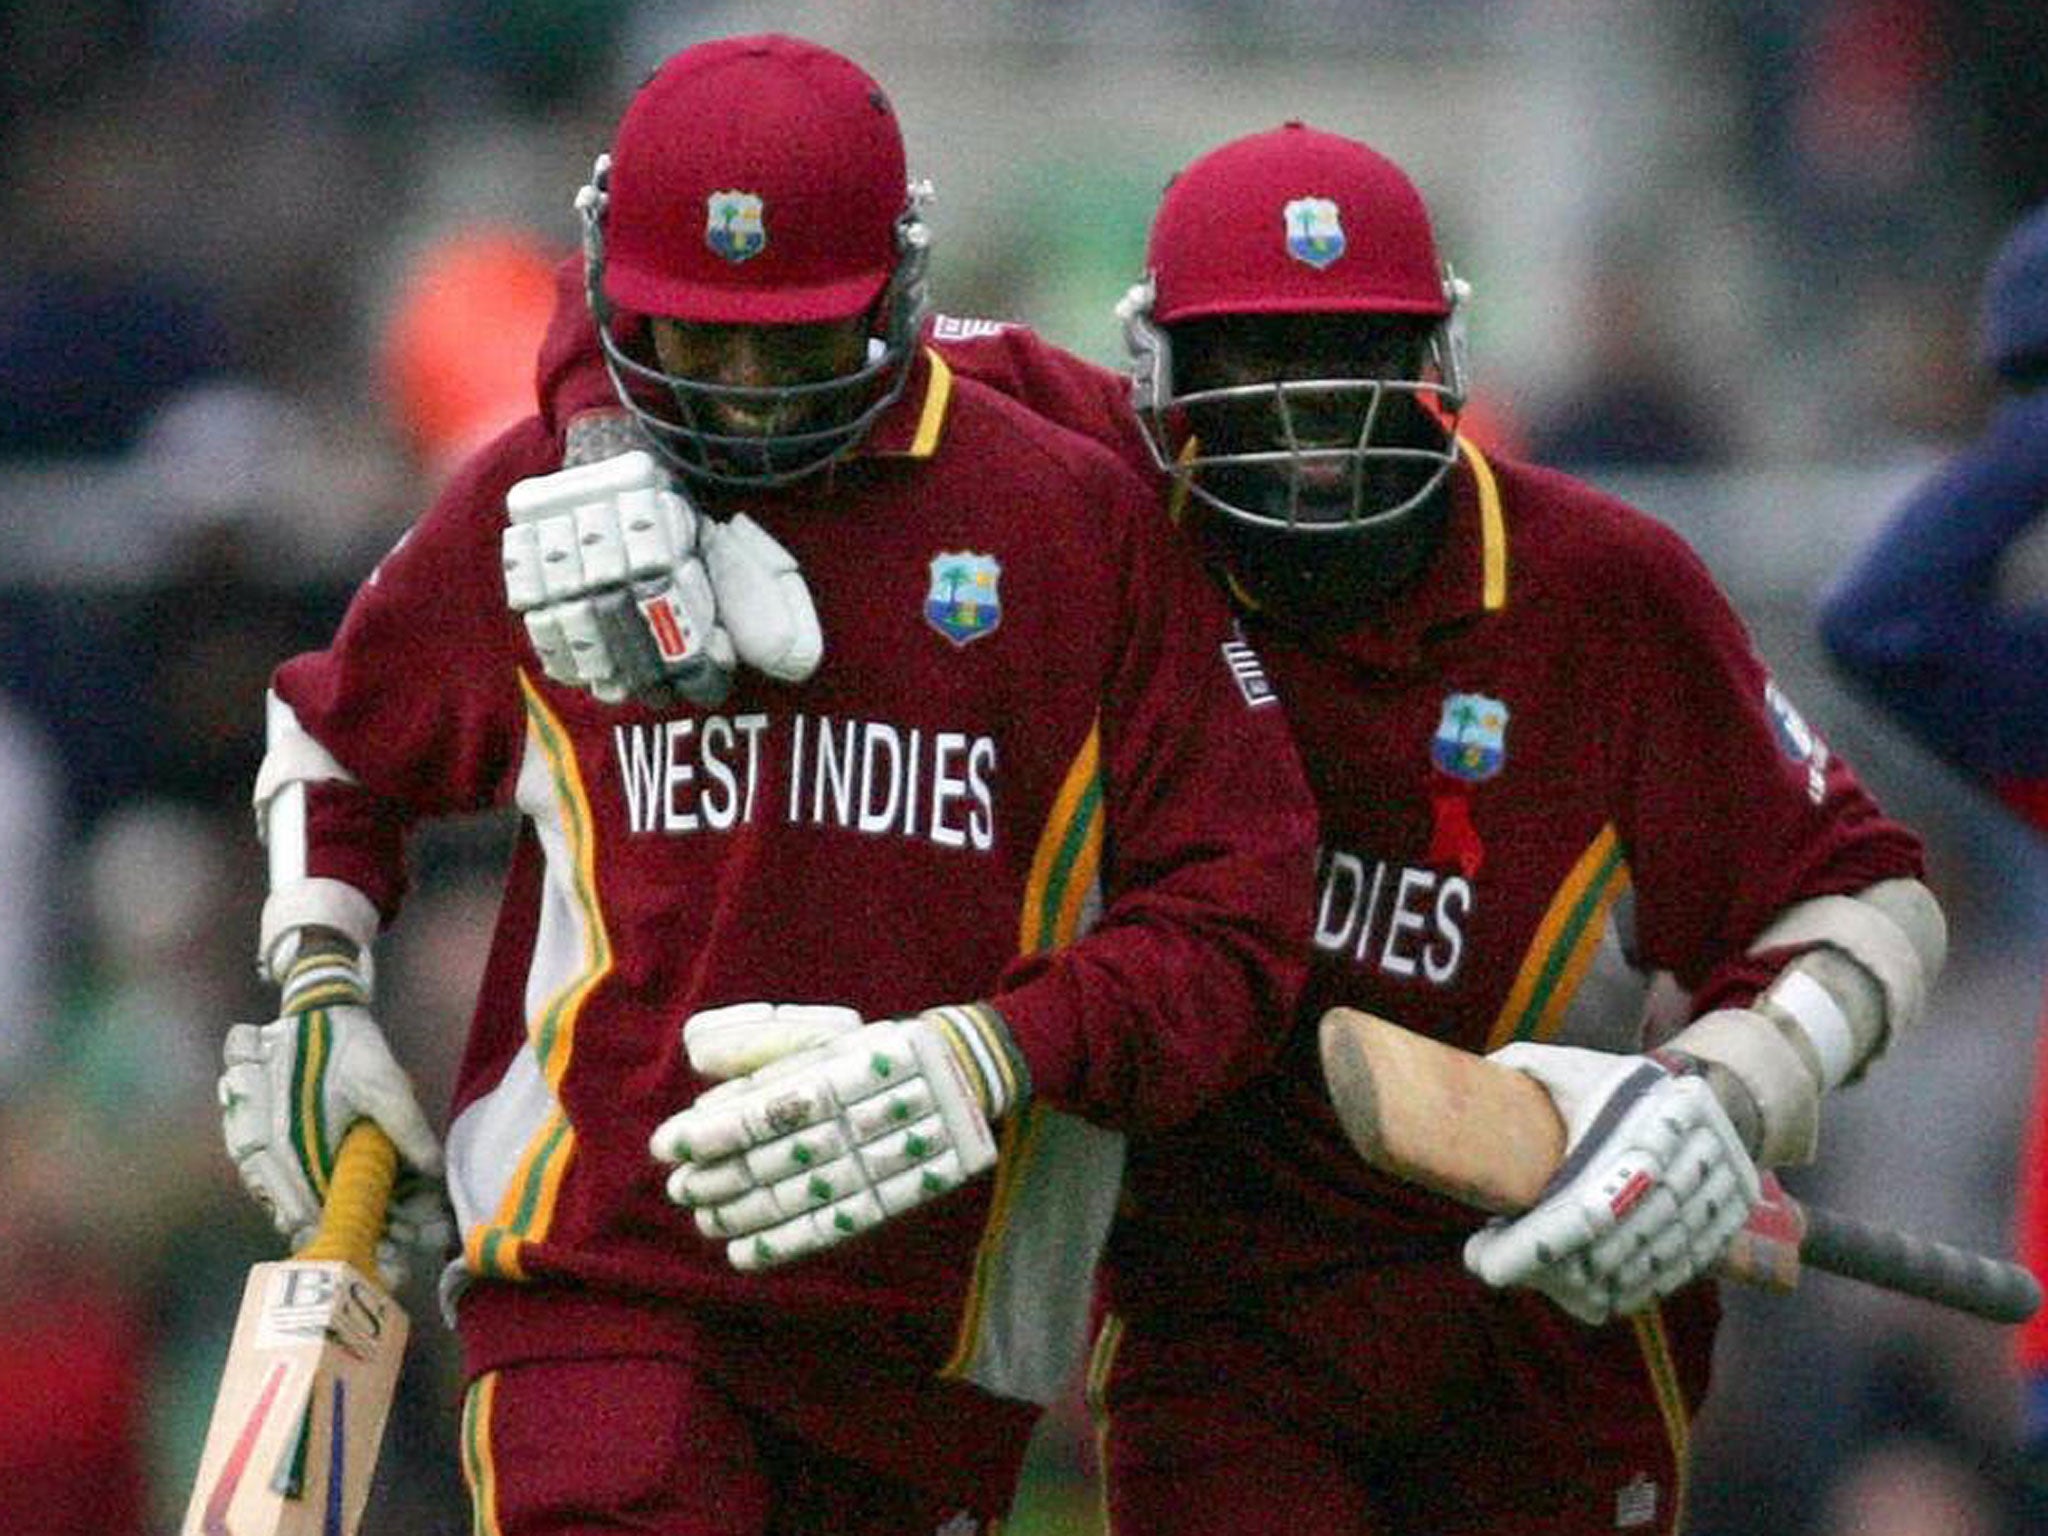 Final flourish: West Indies beat England in the 2004 Champions Trophy